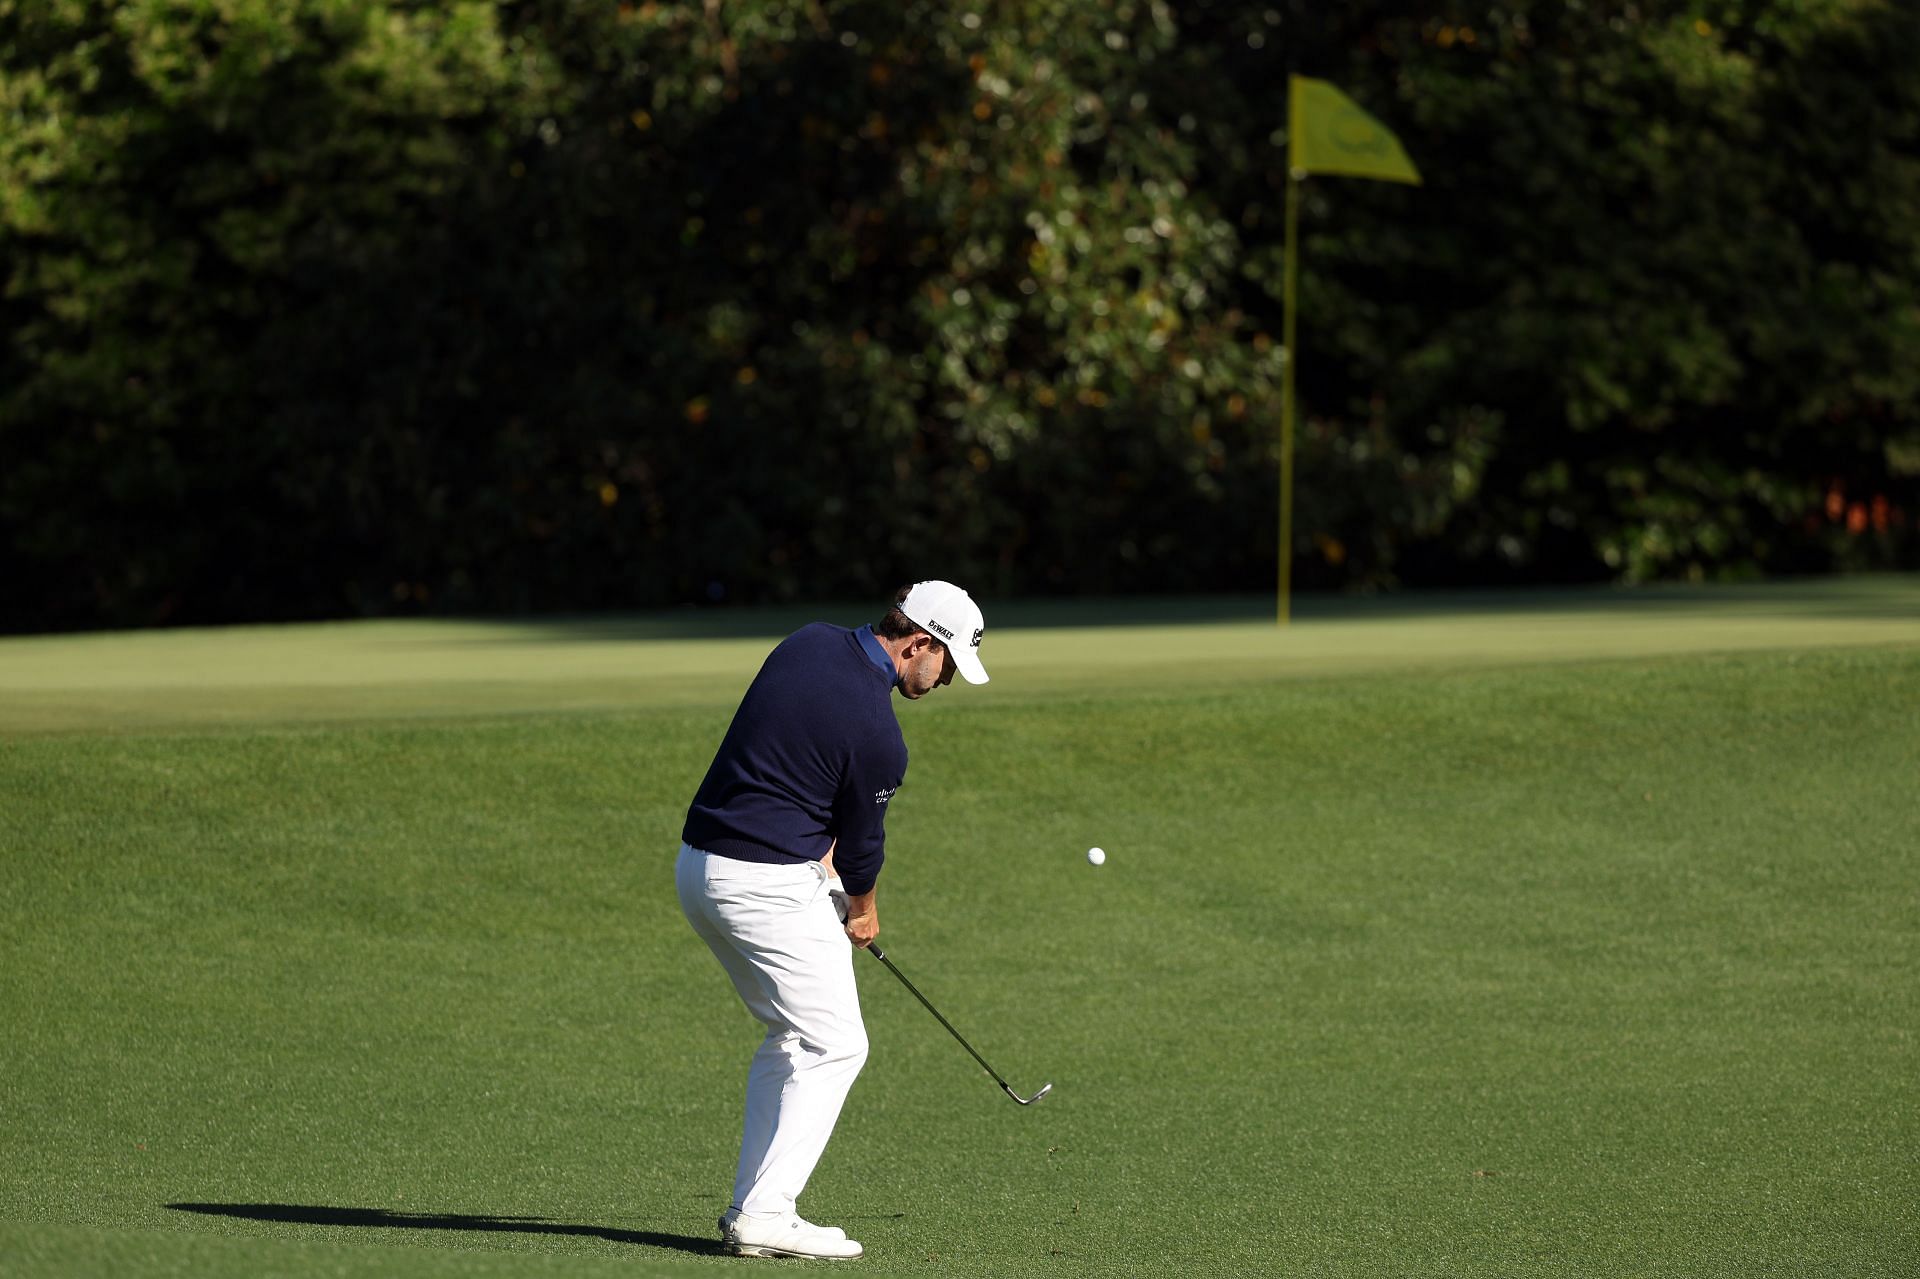 Patrick Cantlay played slow at the Masters